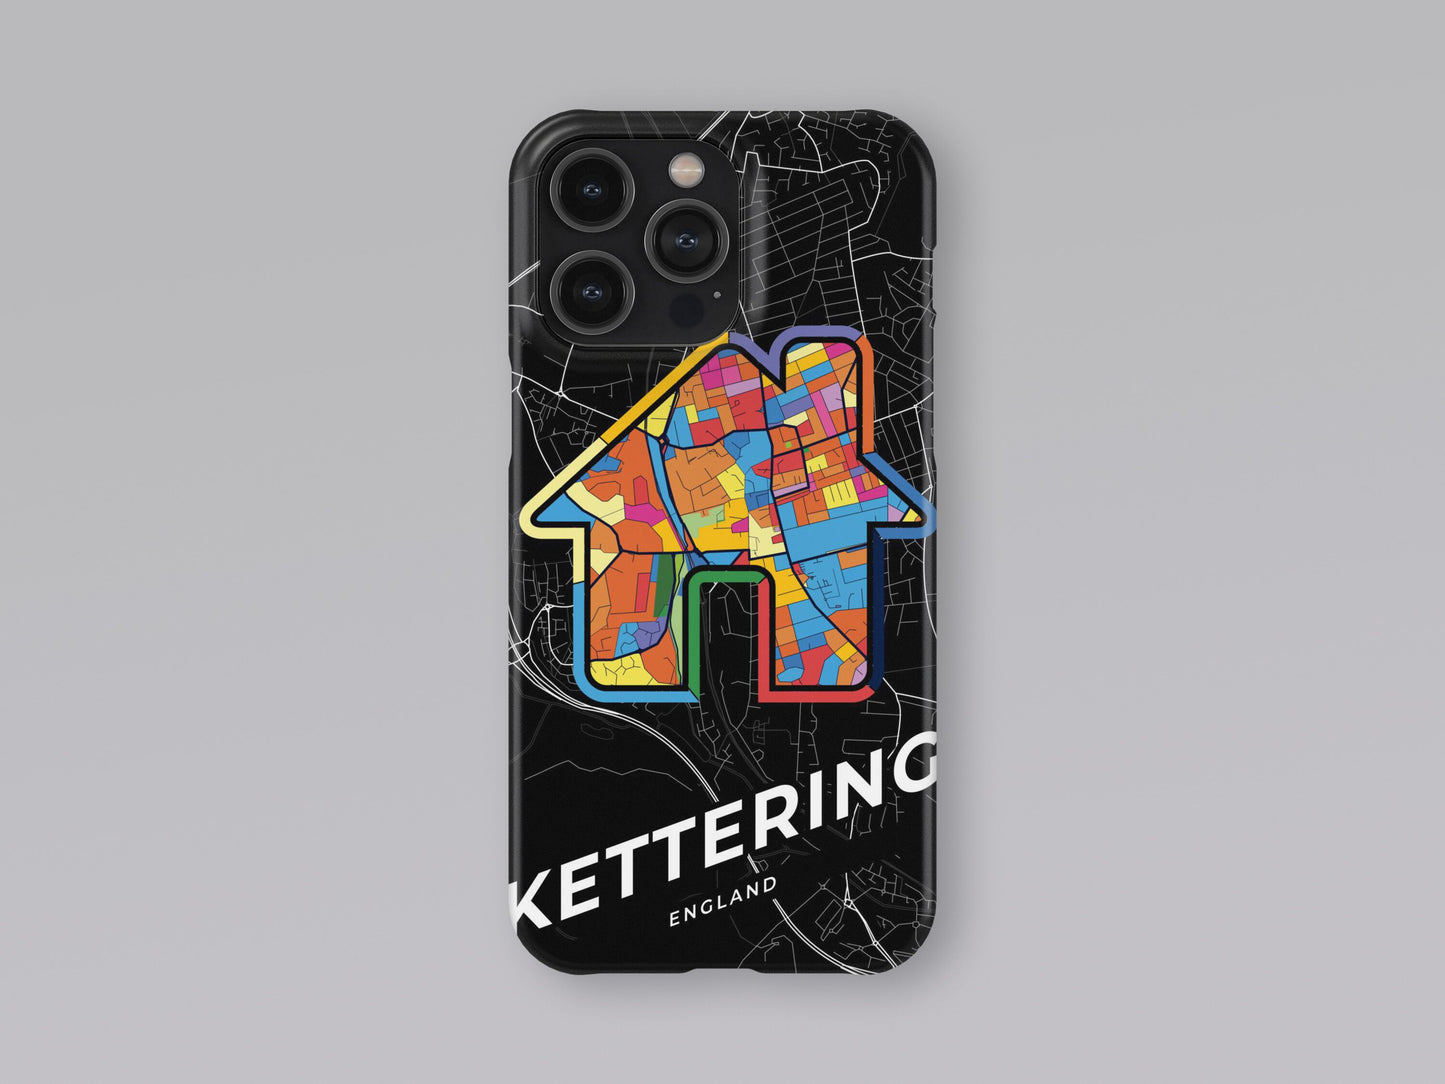 Kettering England slim phone case with colorful icon. Birthday, wedding or housewarming gift. Couple match cases. 3